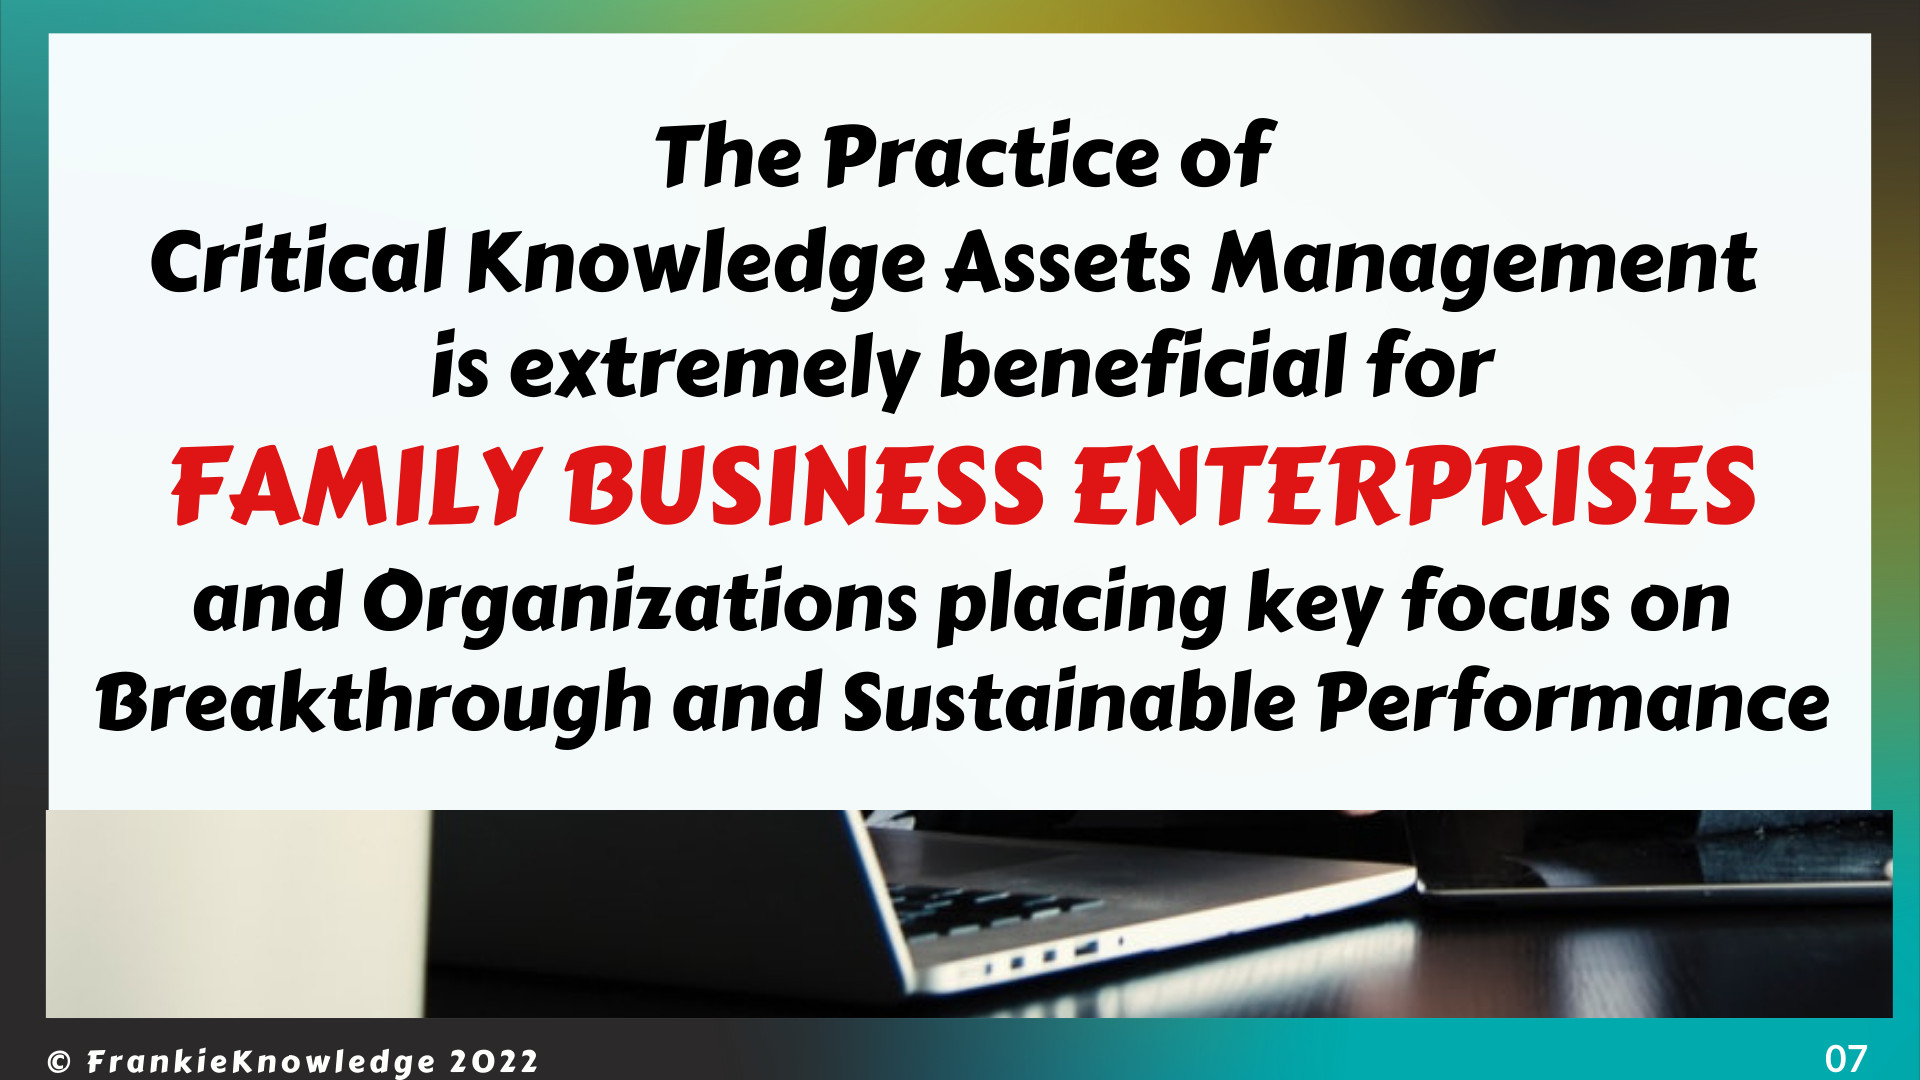 The Practice of Critical Knowledge Assets Management  is extremely beneficial for FAMILY BUSINESS ENTERPRISES and Organizations placing key focus on Breakthrough and Sustainable Performance